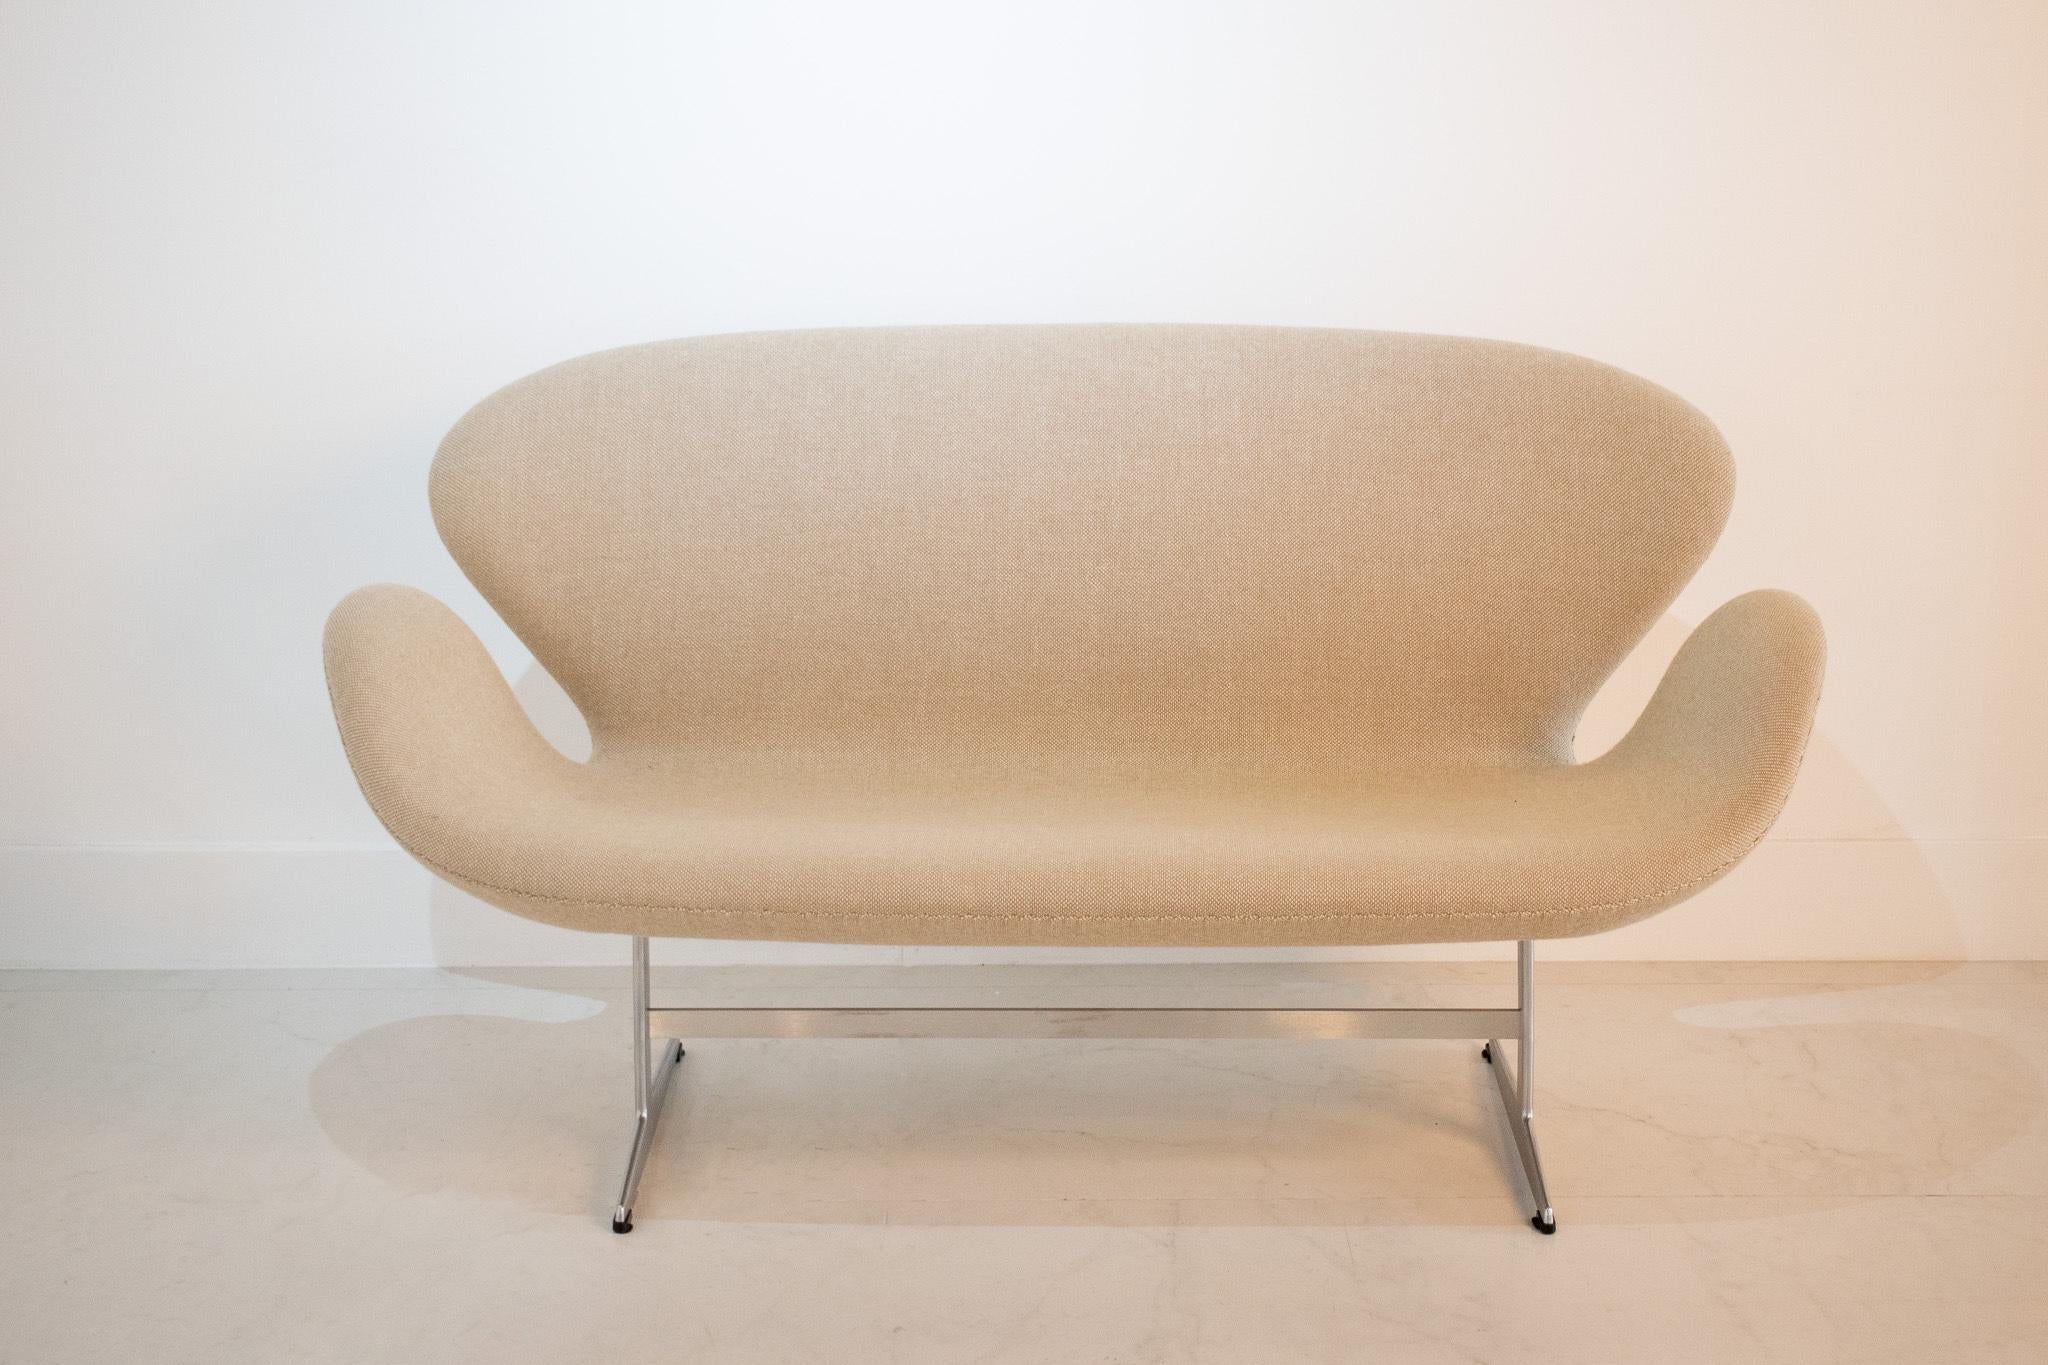 The Swan Sofa was designed by Arne Jacobsen in 1958 for the SAS Royal Hotel in Copenhagen and reintroduced to Fritz Hansen’s collection in 2000.

The design contains no straight lines, making it organic and soft to the eye despite its simplicity and